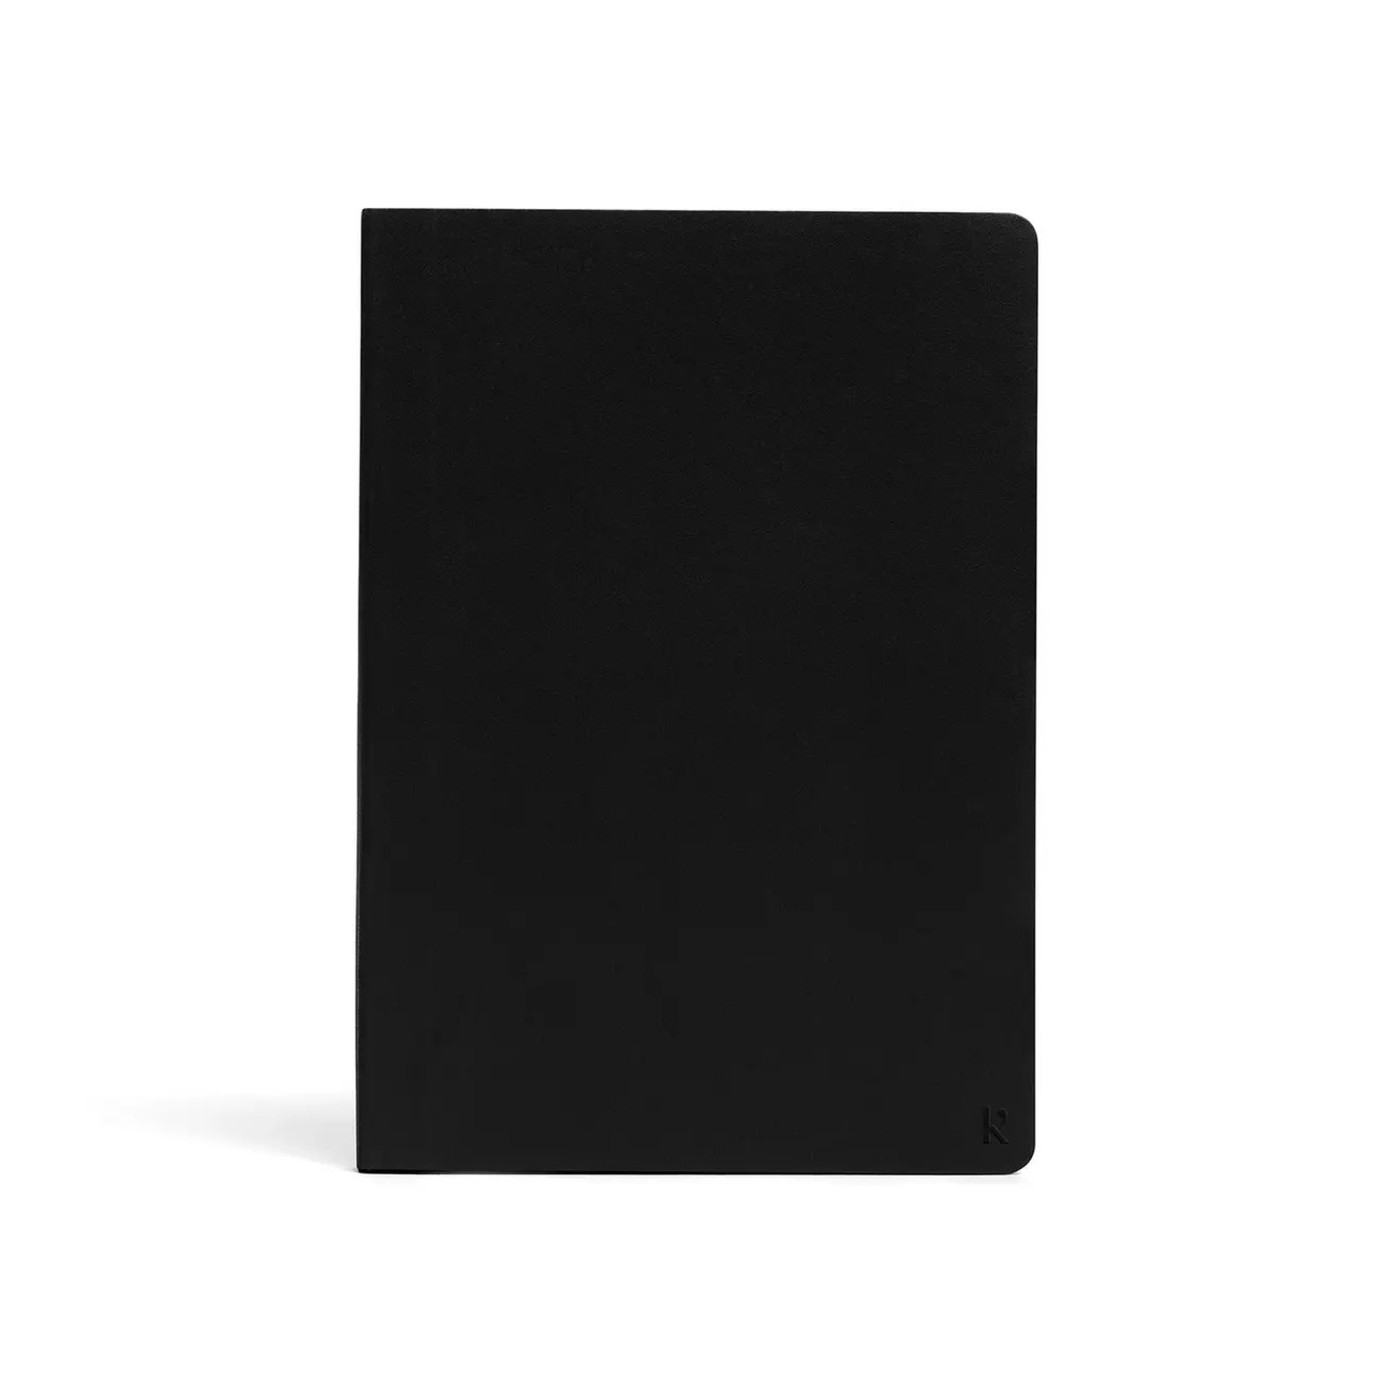 Karst stone paper notebook - soft cover - A5 SQUARED